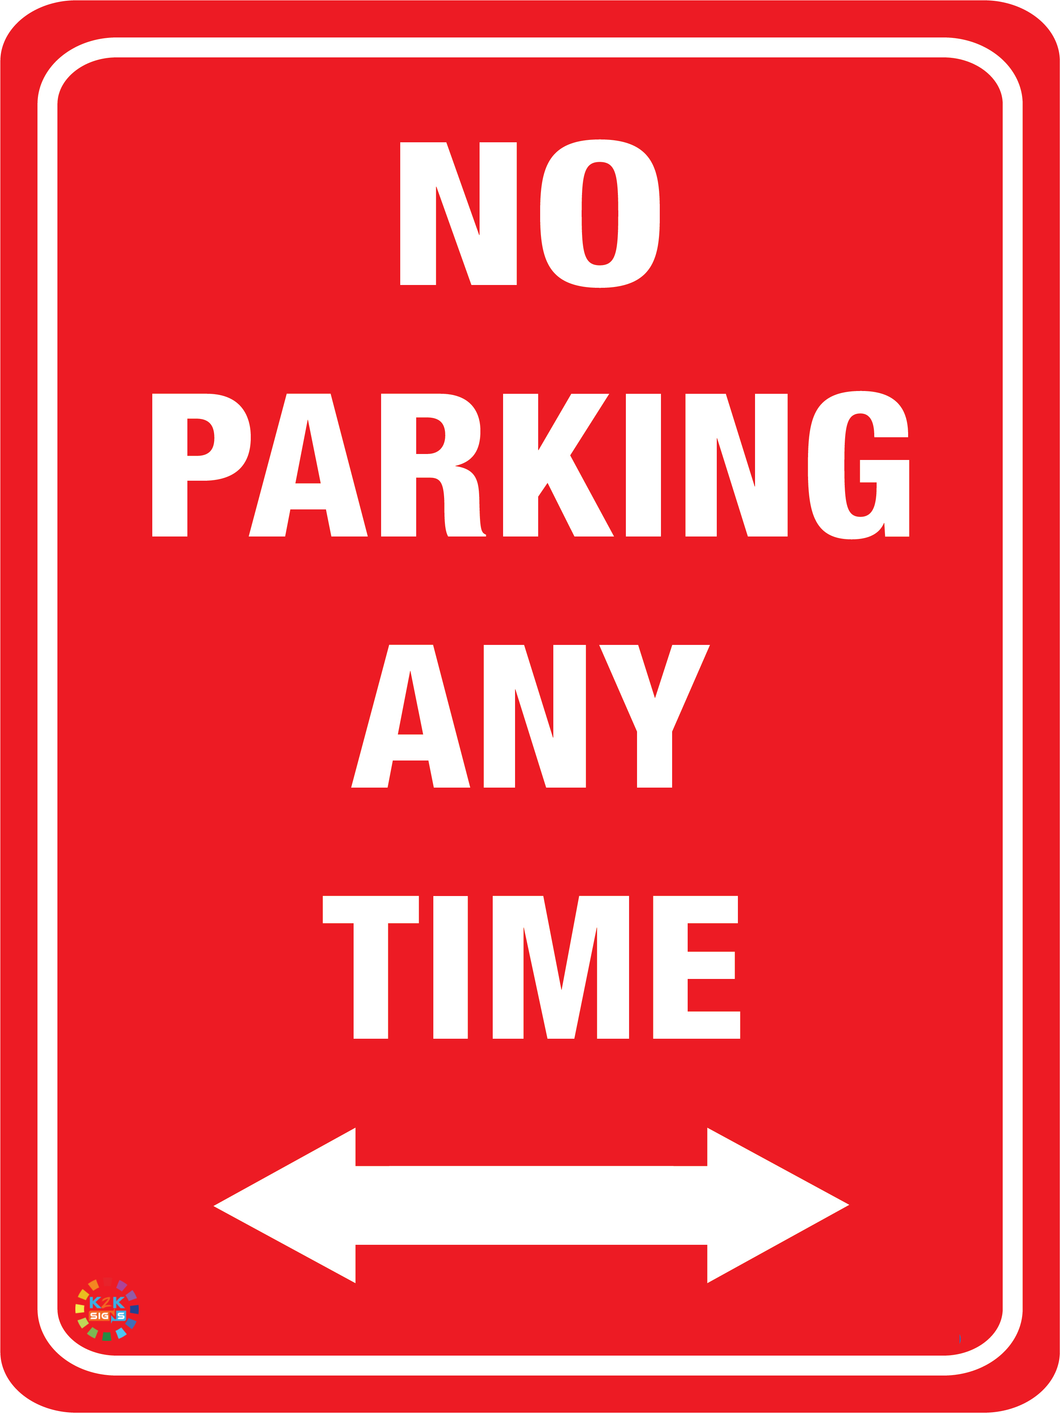 No Parking Any Time (Two Way Arrow) Sign